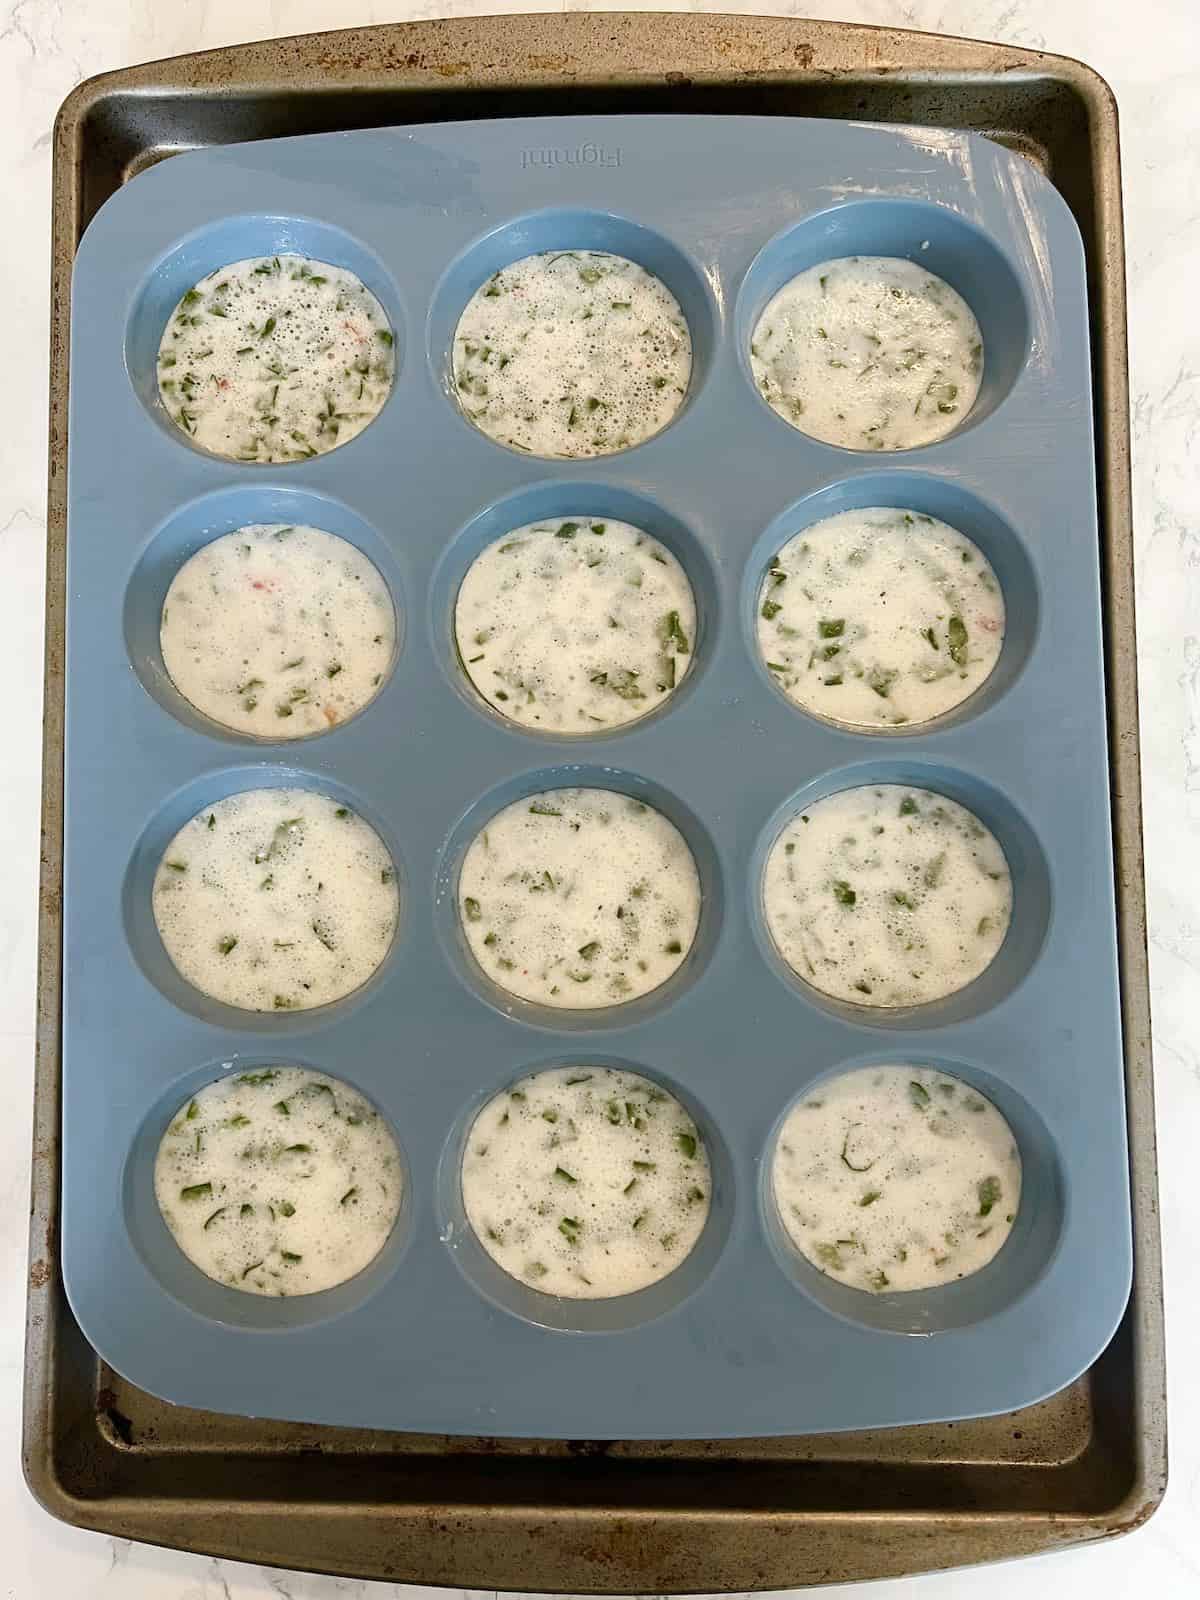 Starbucks egg white bites in a muffin pan before being cooked